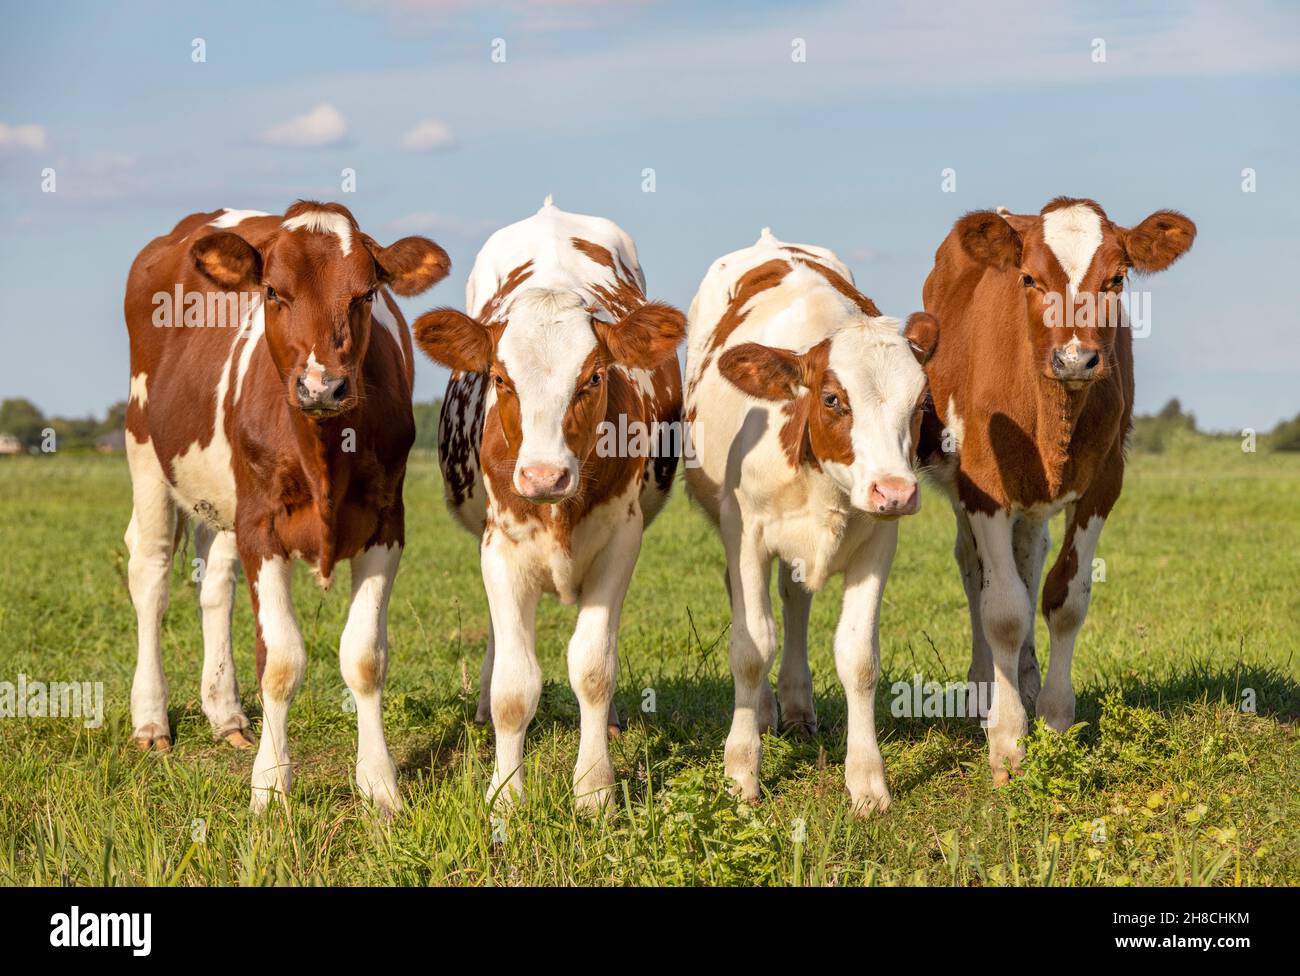 Four calves in a row, cows side by side, standing upright in a green meadow, red white in the Netherlands. Stock Photo